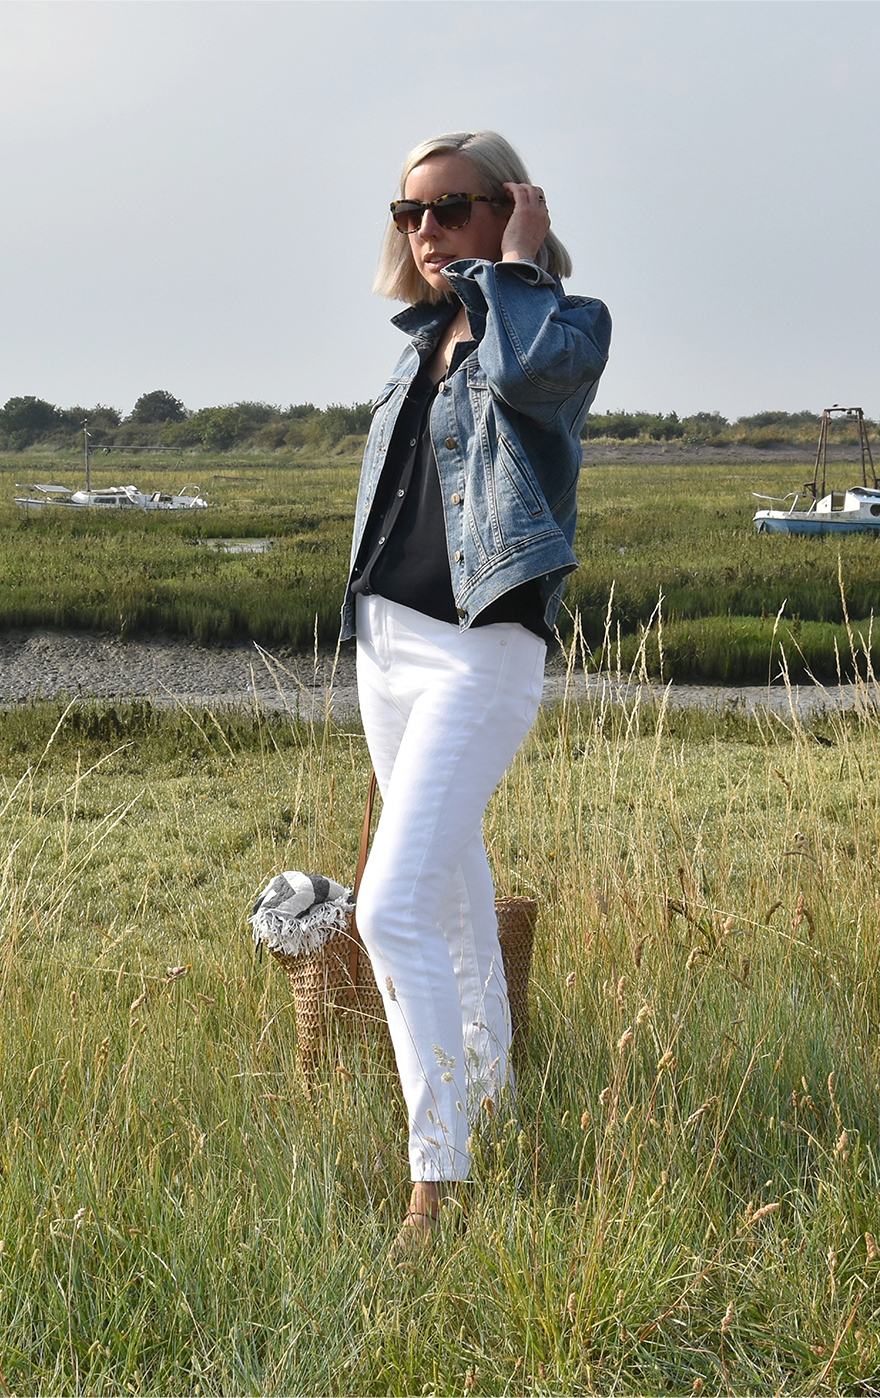 Jen Wilkins, Creative Copy & Editorial Manager at Hobbs stands in a secluded spot by the coast wearing a blue denim jacket, a navy blue blouse, white denim jeans and tan sandals styled with a straw bag.